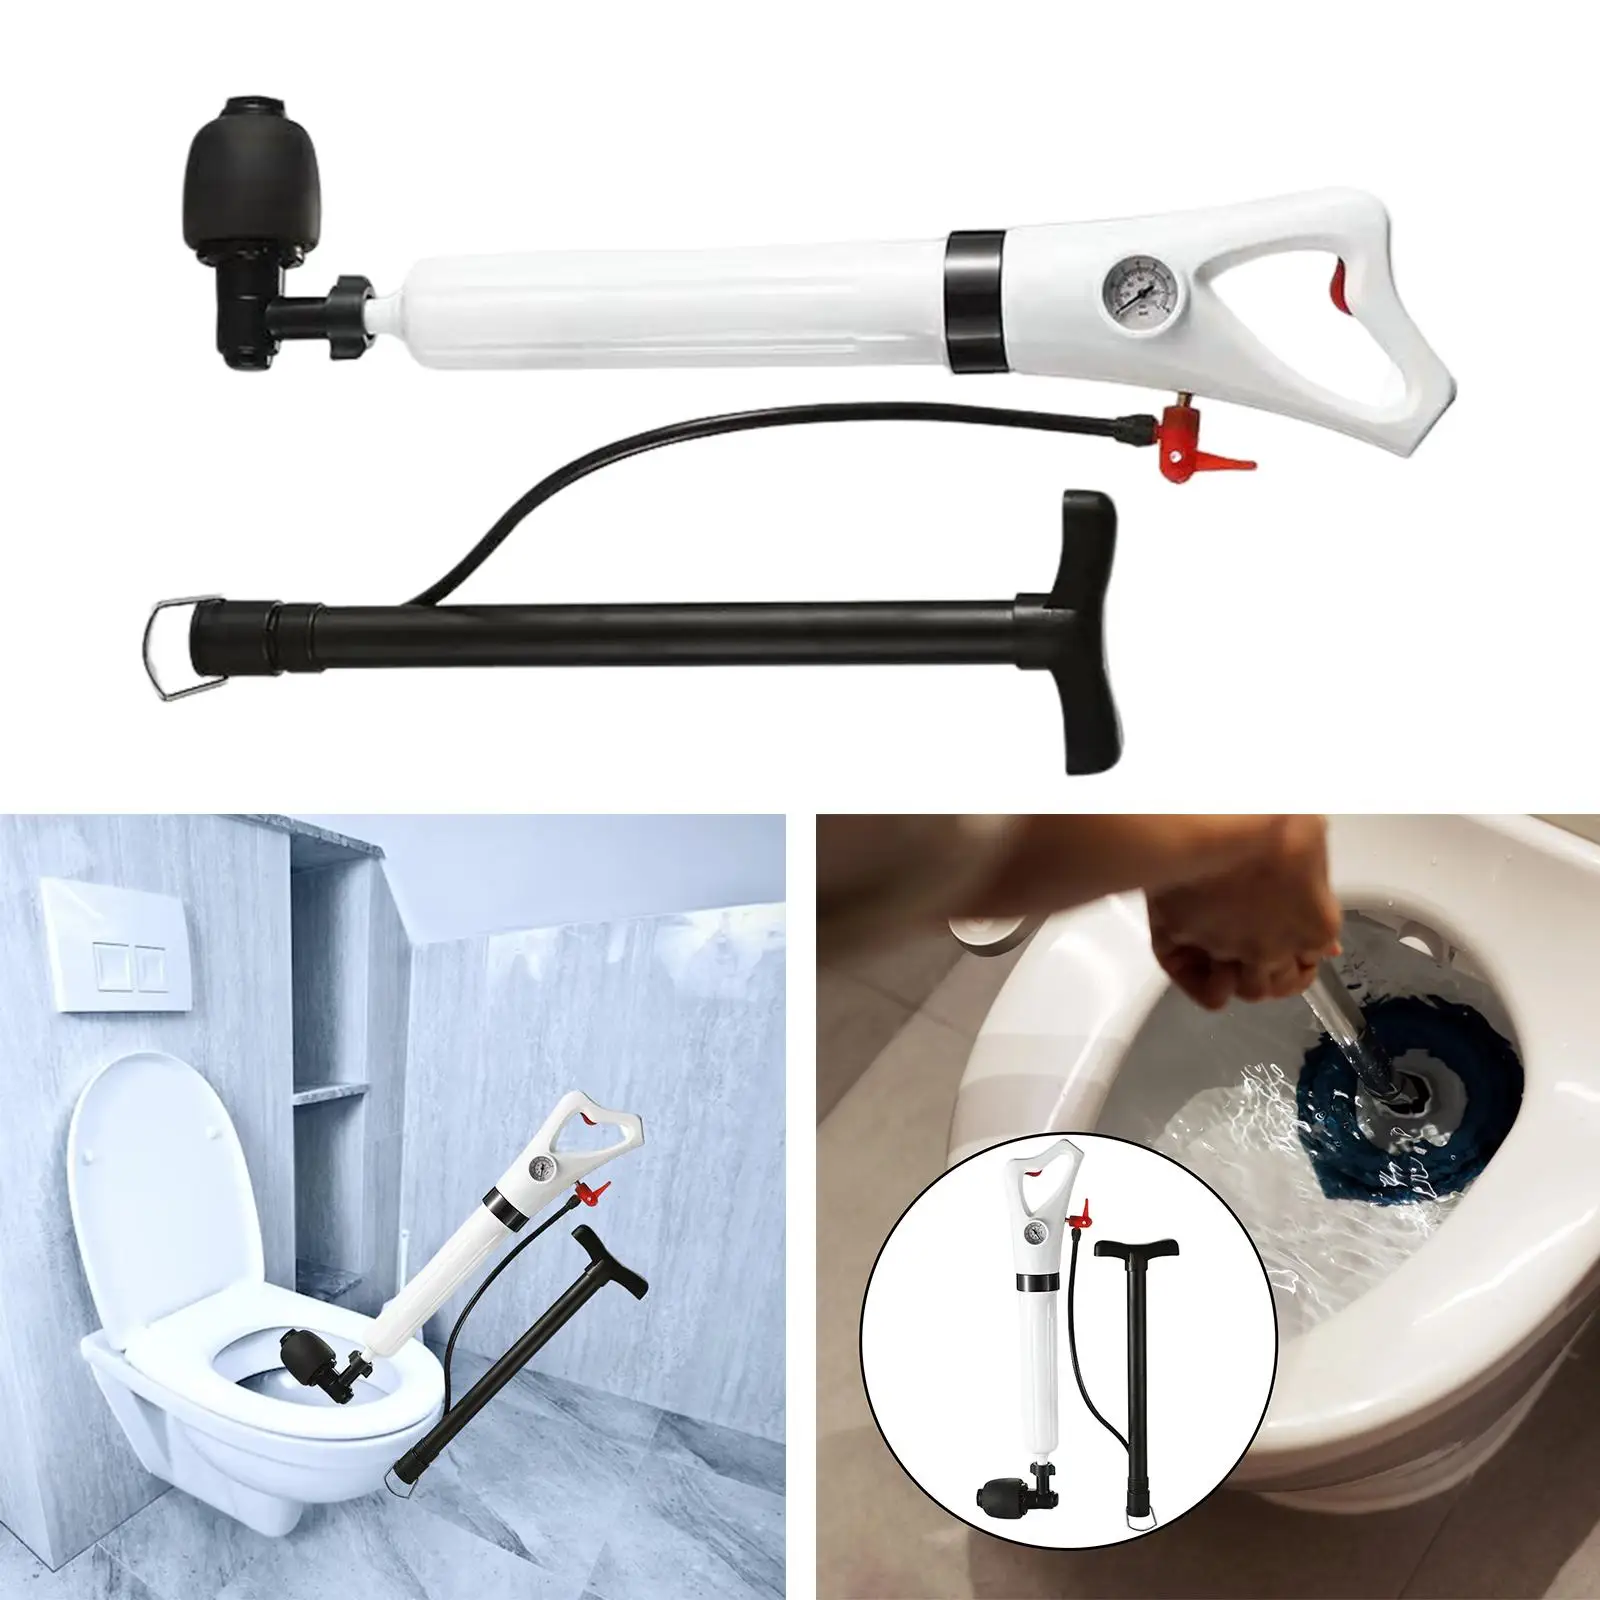 Toilet Plunger set Air drain Clog Remover Replaceable Heads Sewer Dredge Tool for Hotel